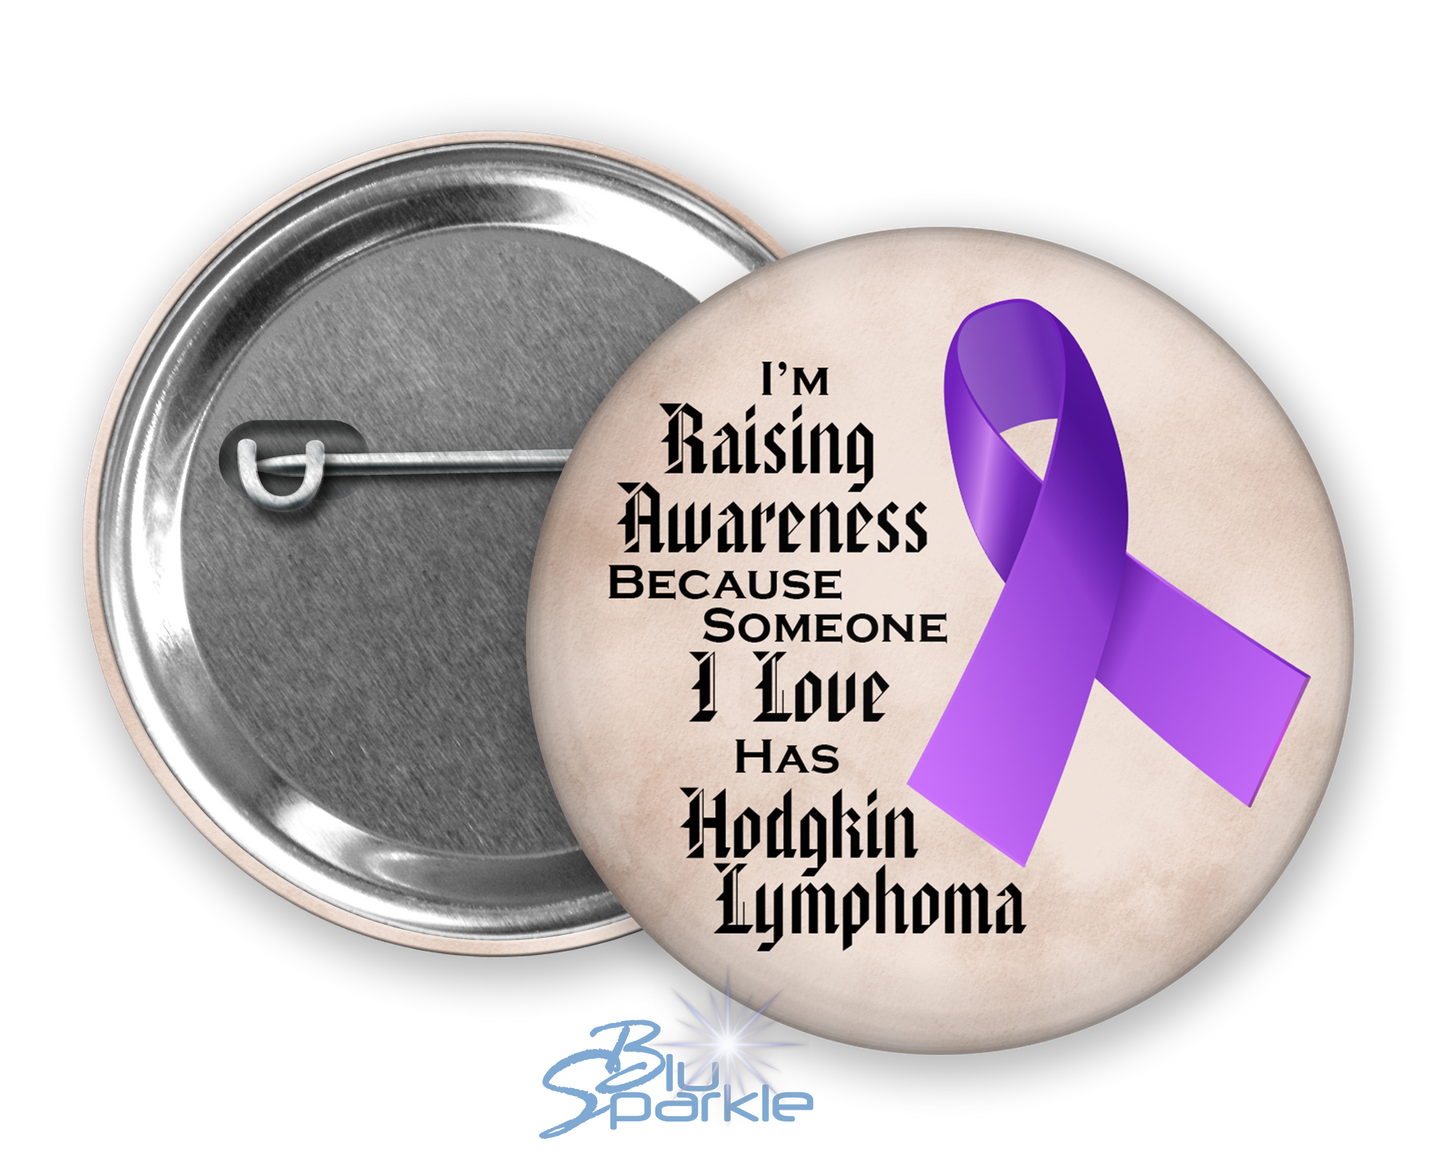 I'm Raising Awareness Because Someone I Love Died From (Has, Survived) Hodgkin's Lymphoma Pinback Button |x|